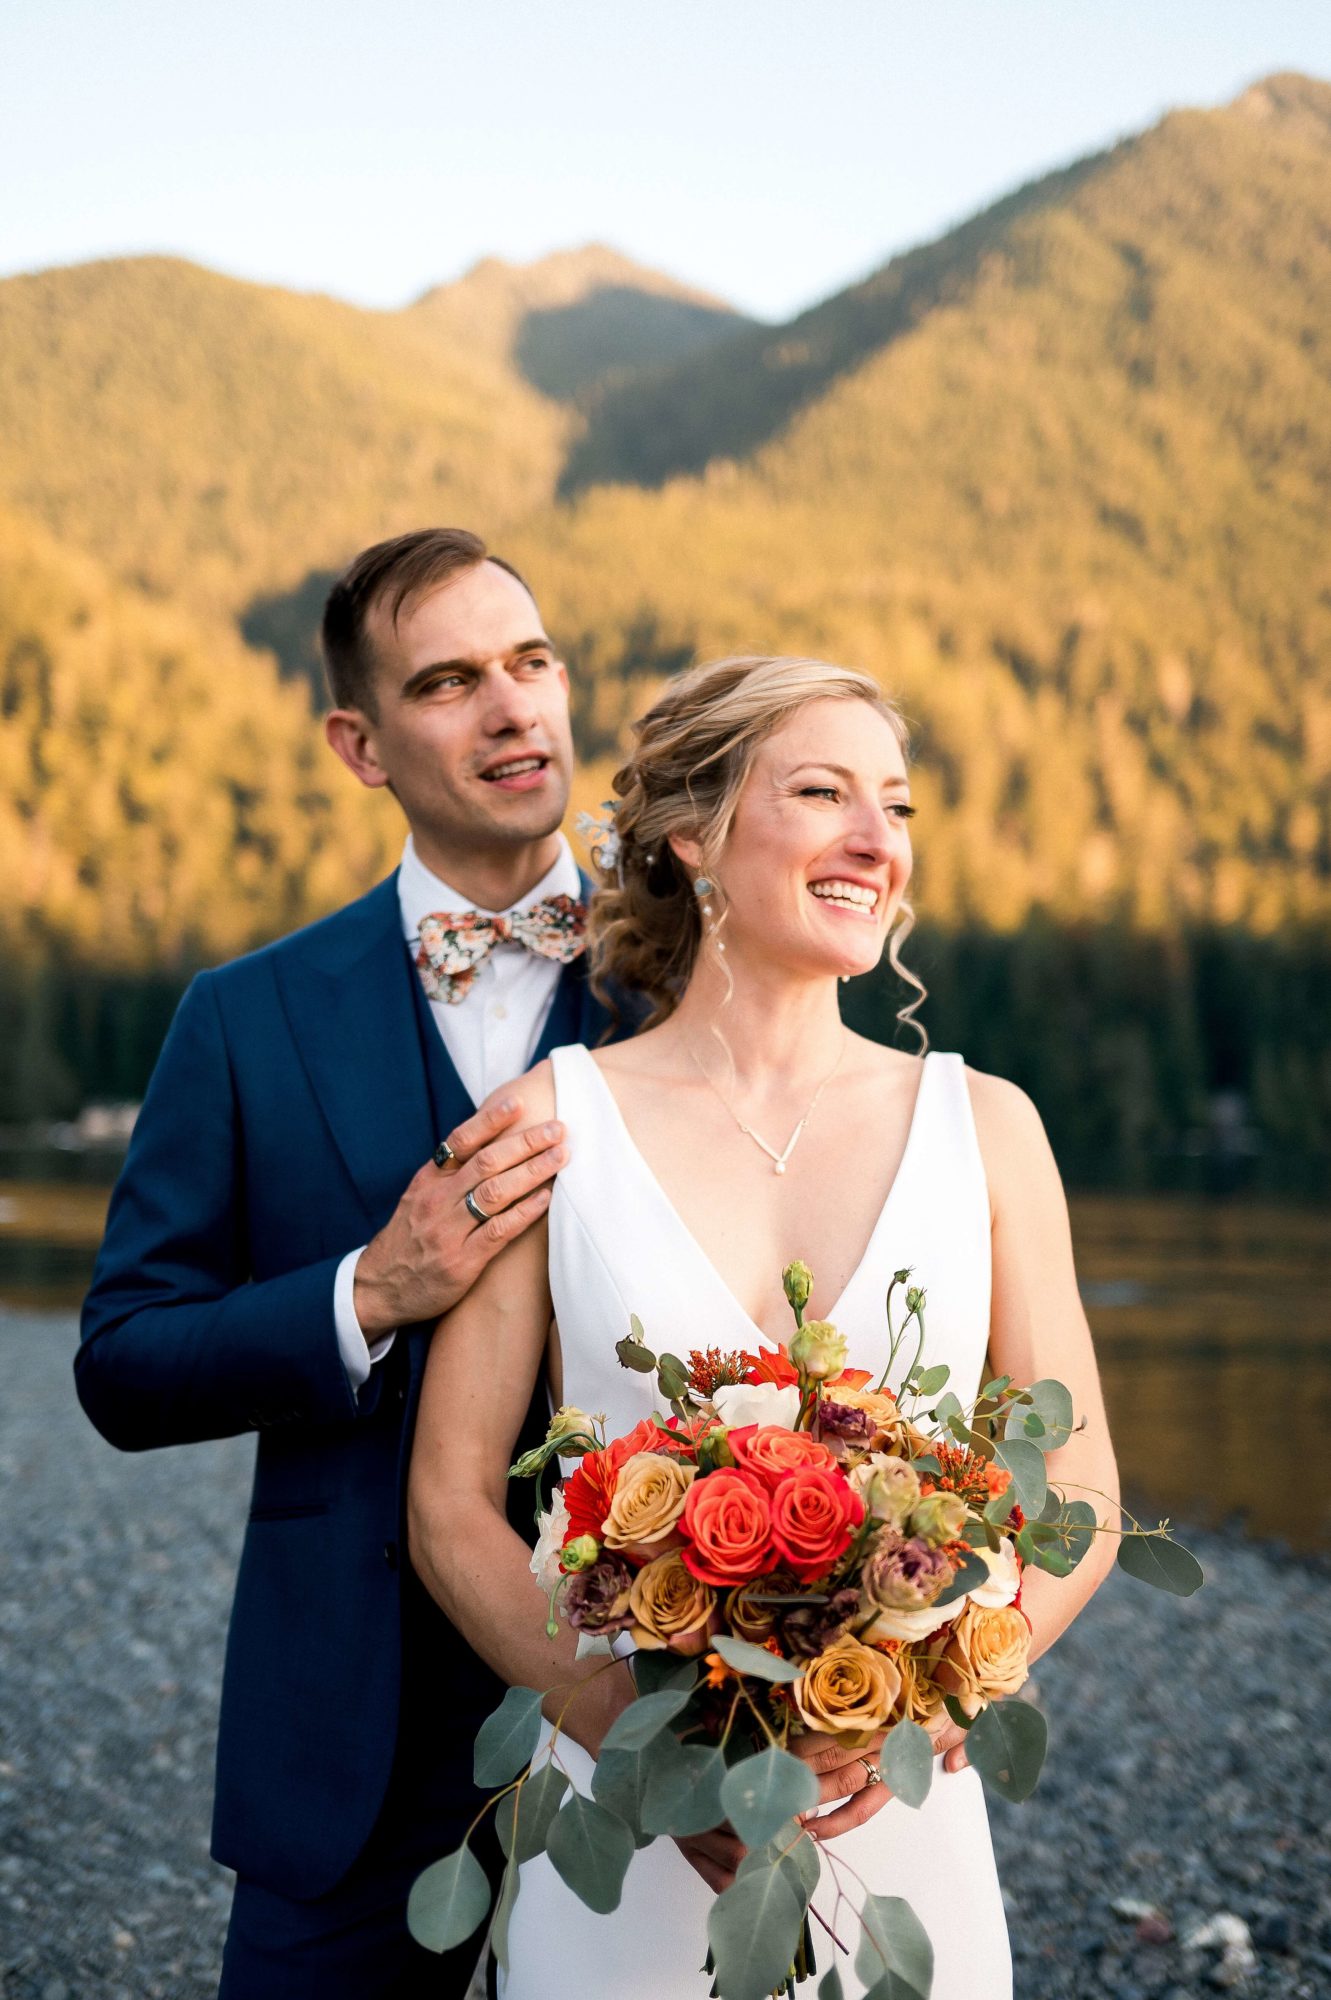 Bride and groom together in front of mountains